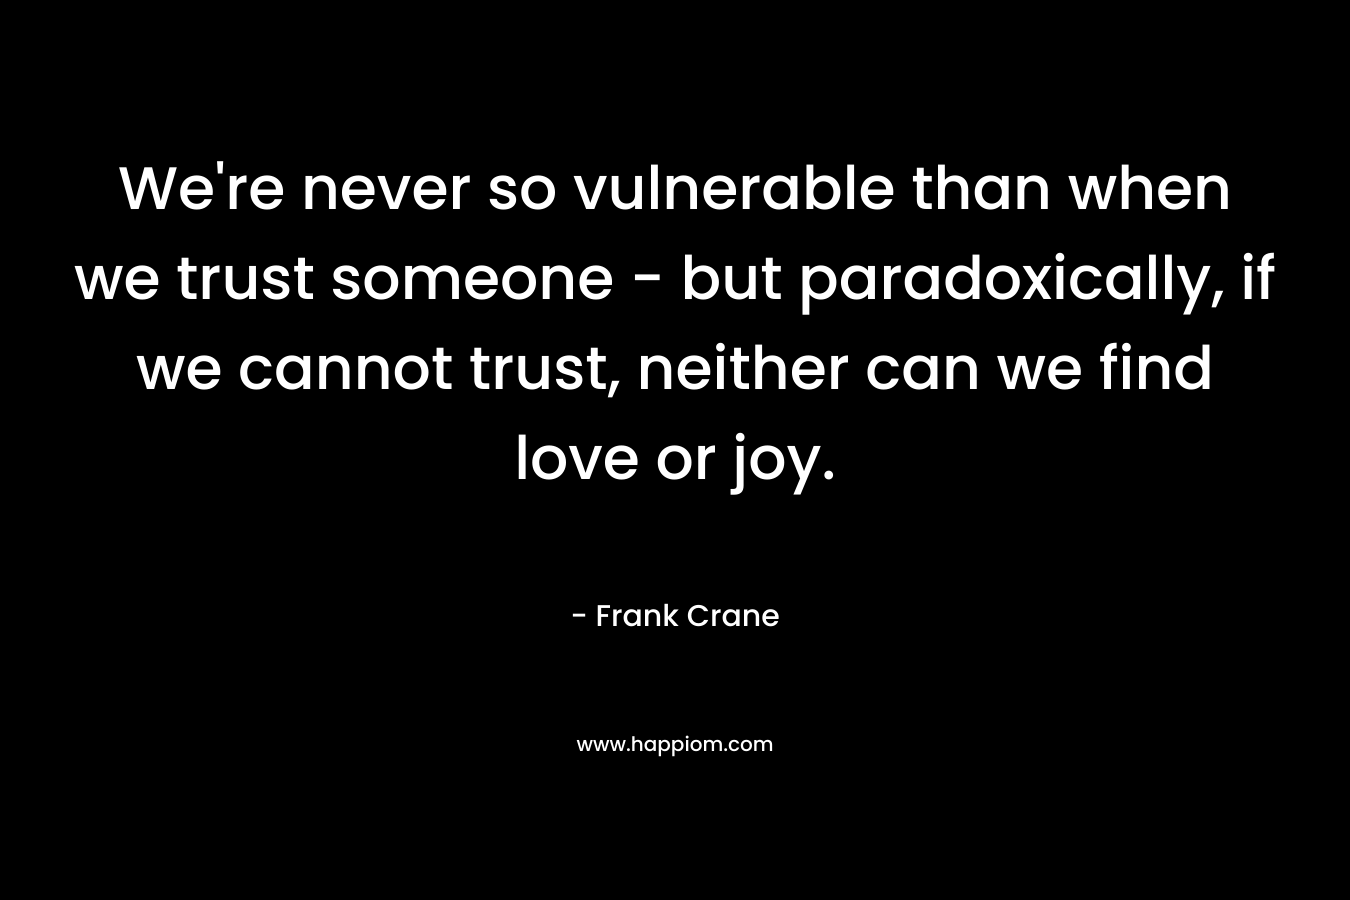 We’re never so vulnerable than when we trust someone – but paradoxically, if we cannot trust, neither can we find love or joy. – Frank Crane